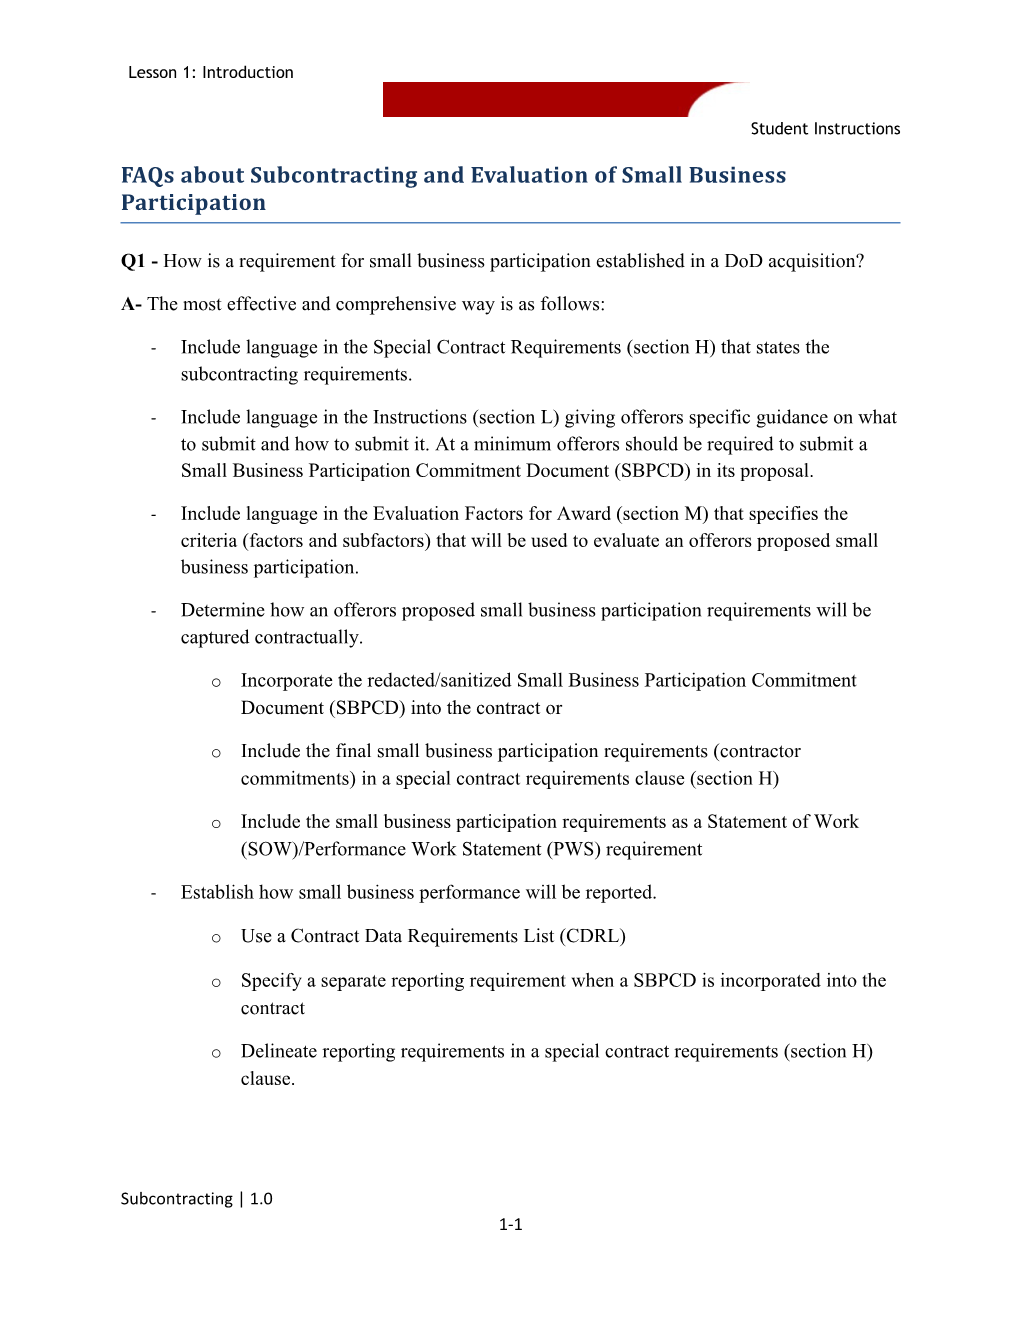 Faqs About Subcontracting and Evaluation of Small Business Participation